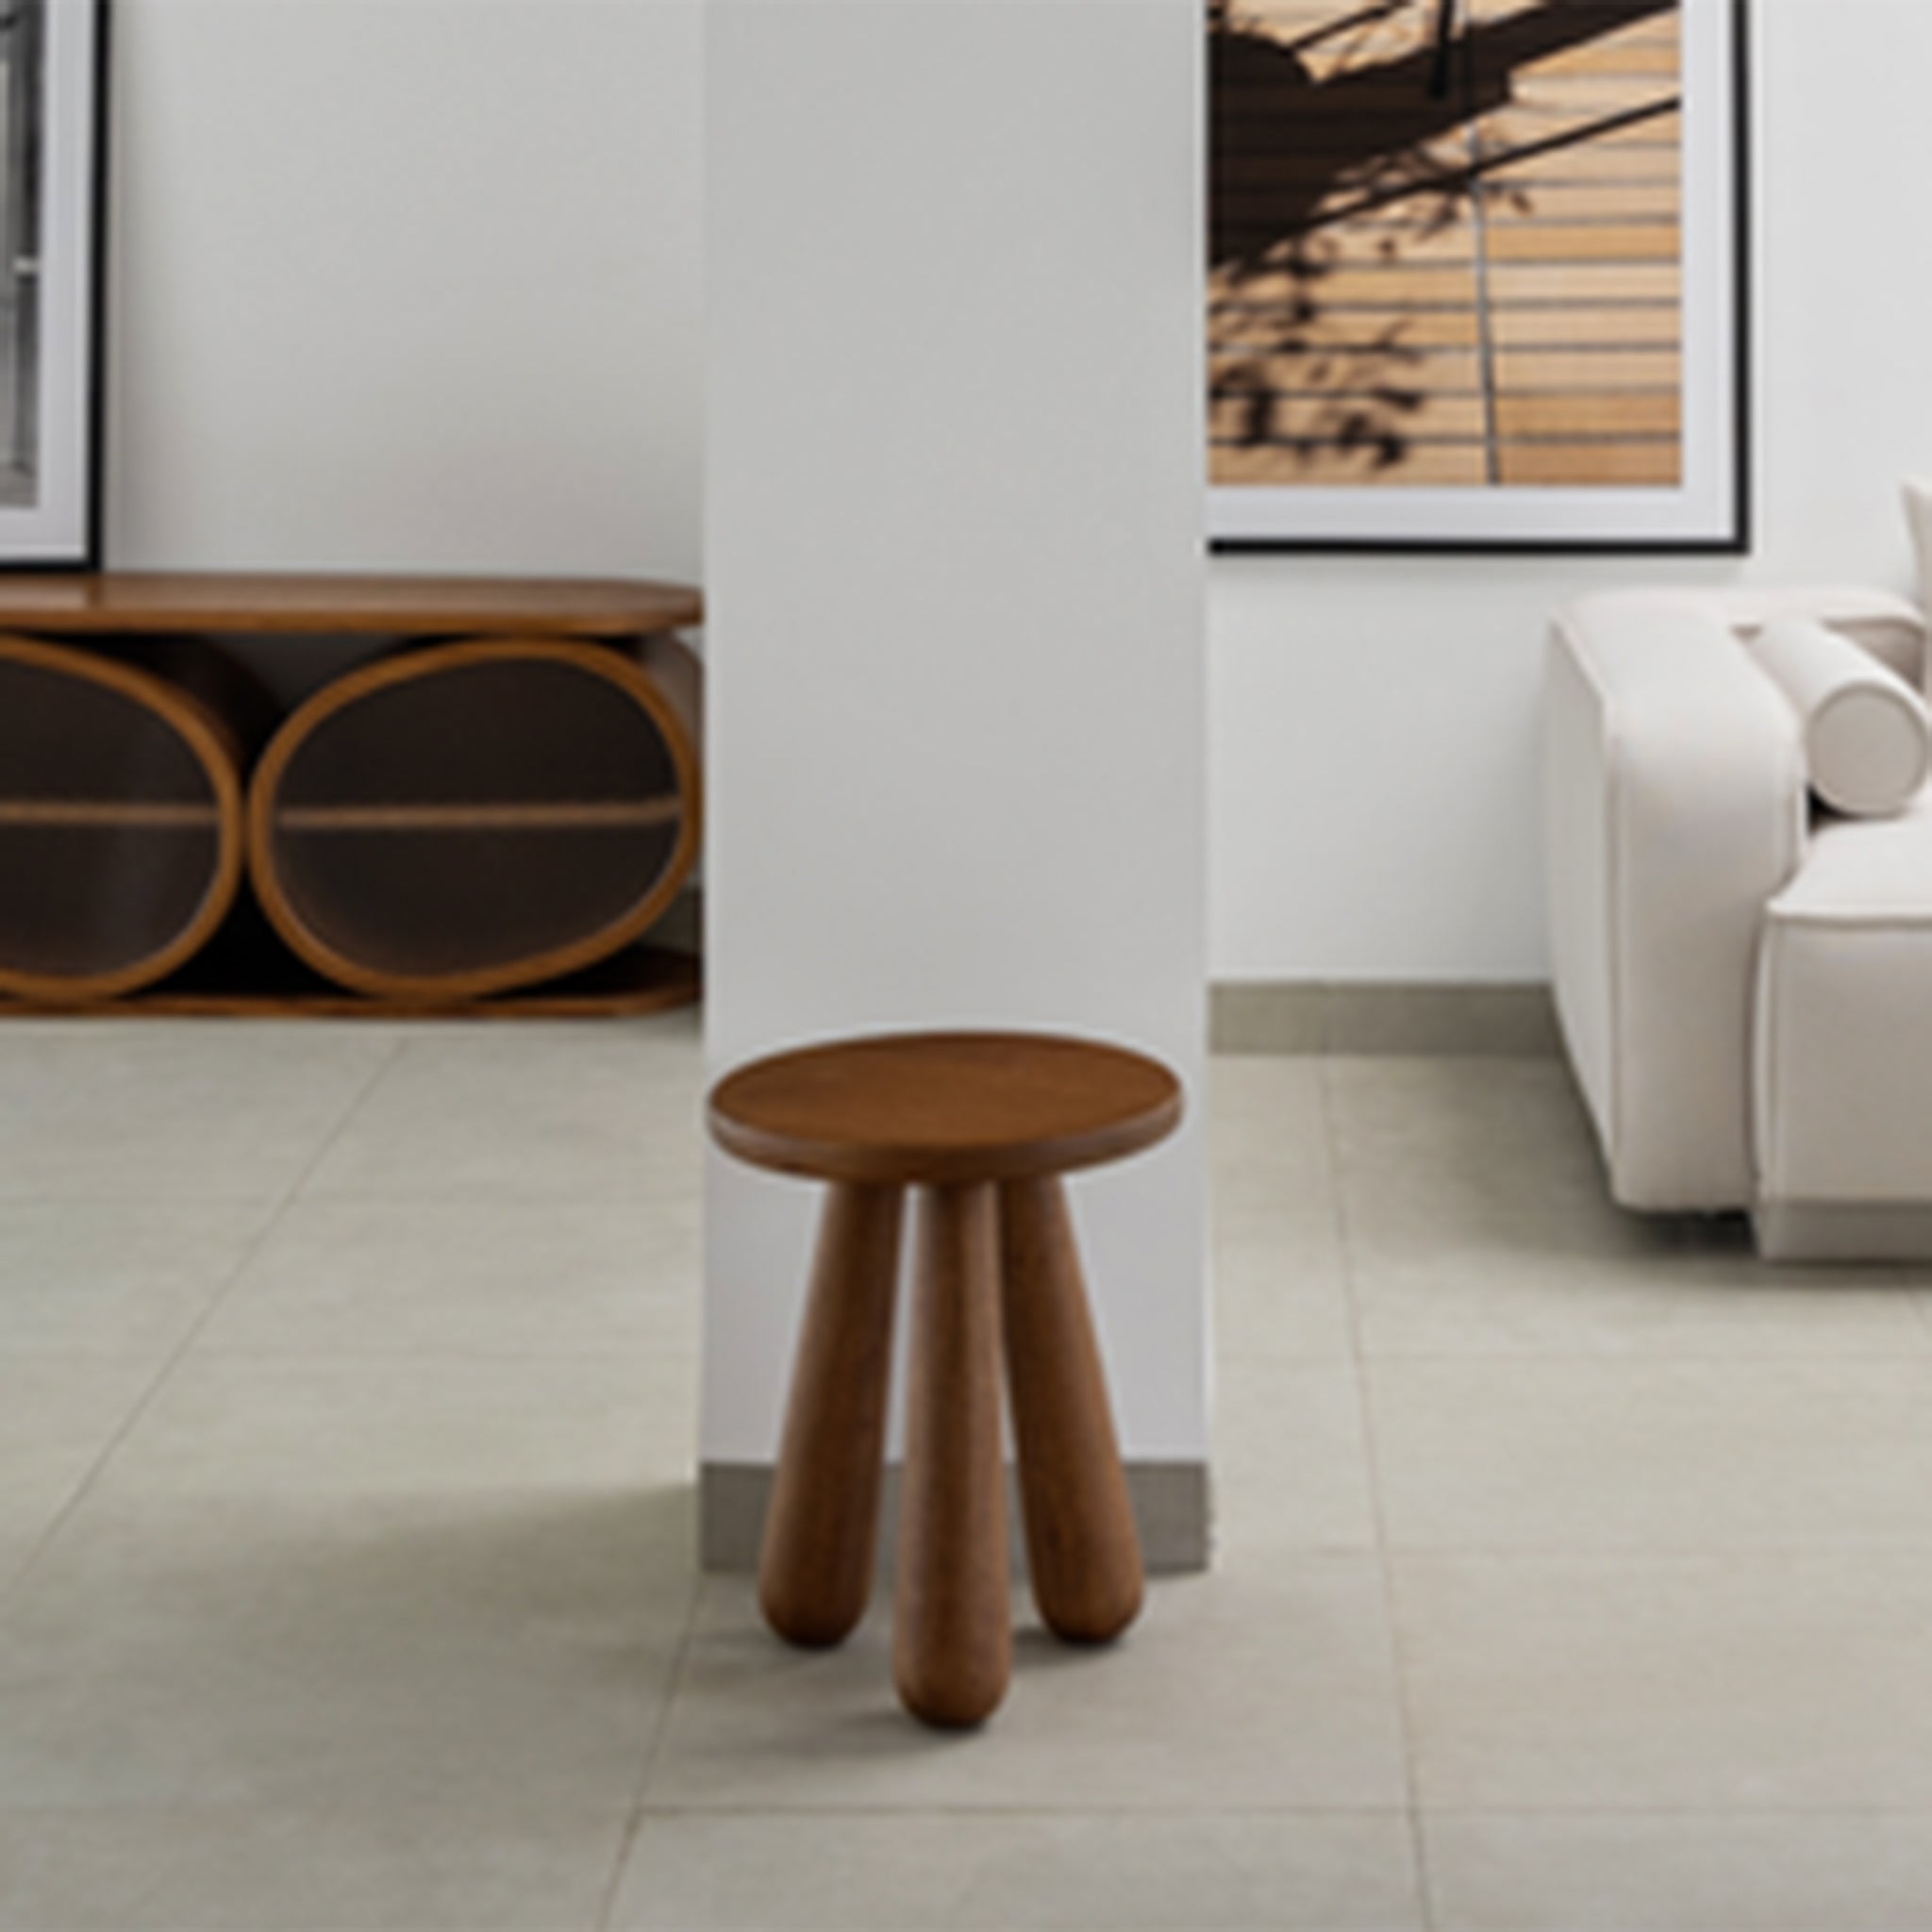 Brown wooden side table with chunky legs placed against a white column in a modern living room with minimalist decor